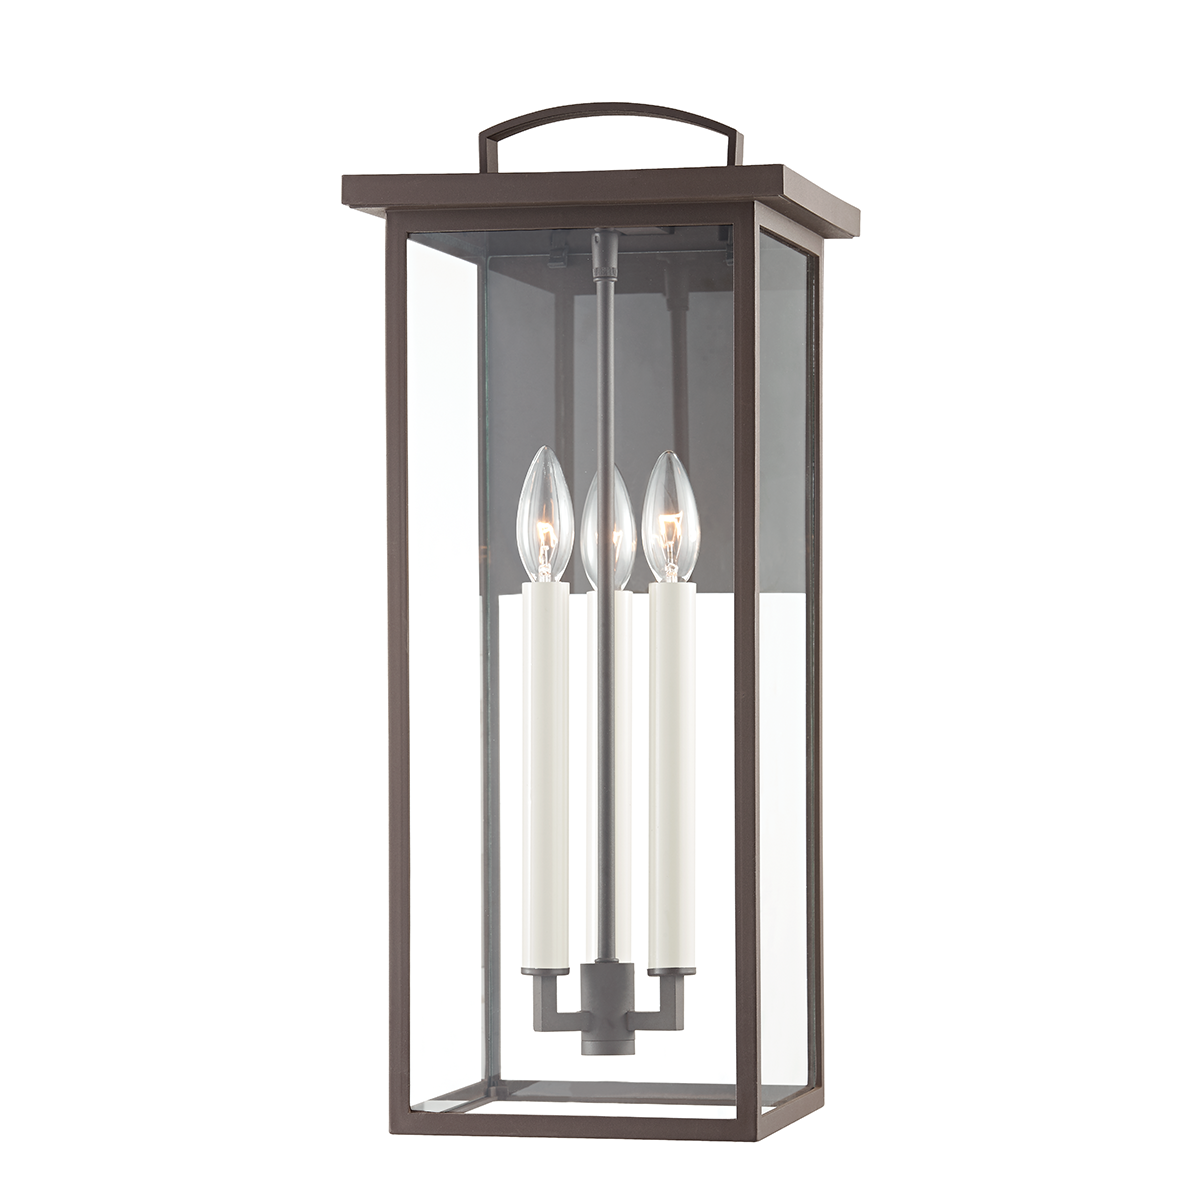 Troy Lighting 3 LIGHT LARGE EXTERIOR WALL SCONCE B7523 Outdoor l Wall Troy Lighting TEXTURED BRONZE  